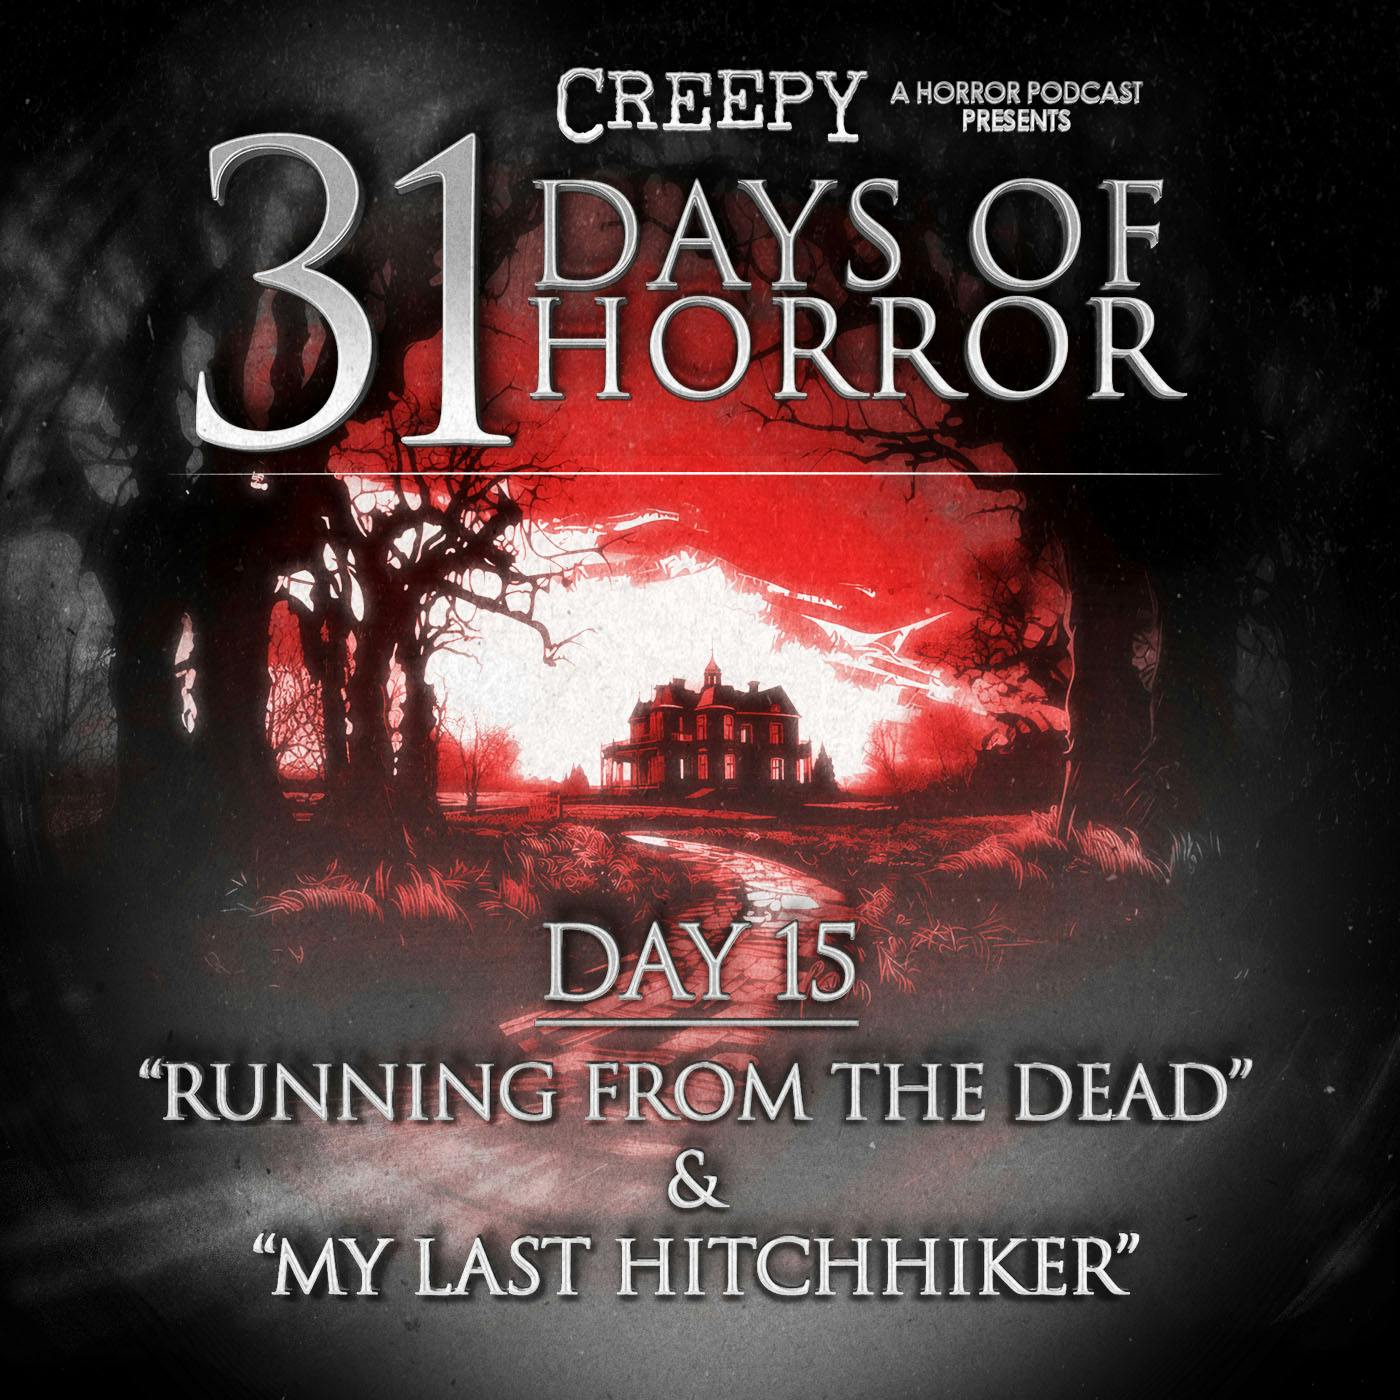 Day 15 - Running from the Dead & My Last Hitchhiker